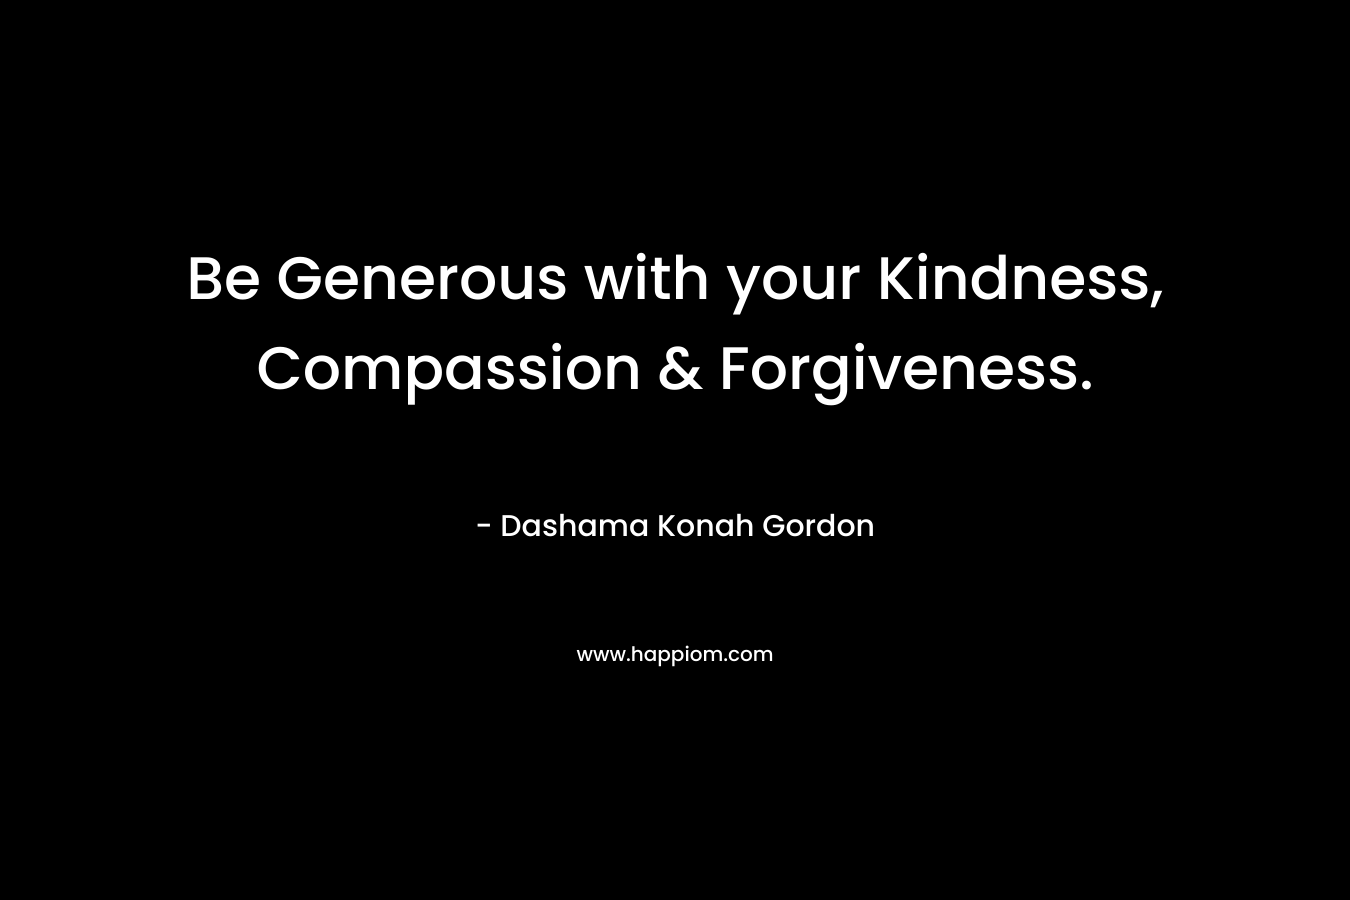 Be Generous with your Kindness, Compassion & Forgiveness.